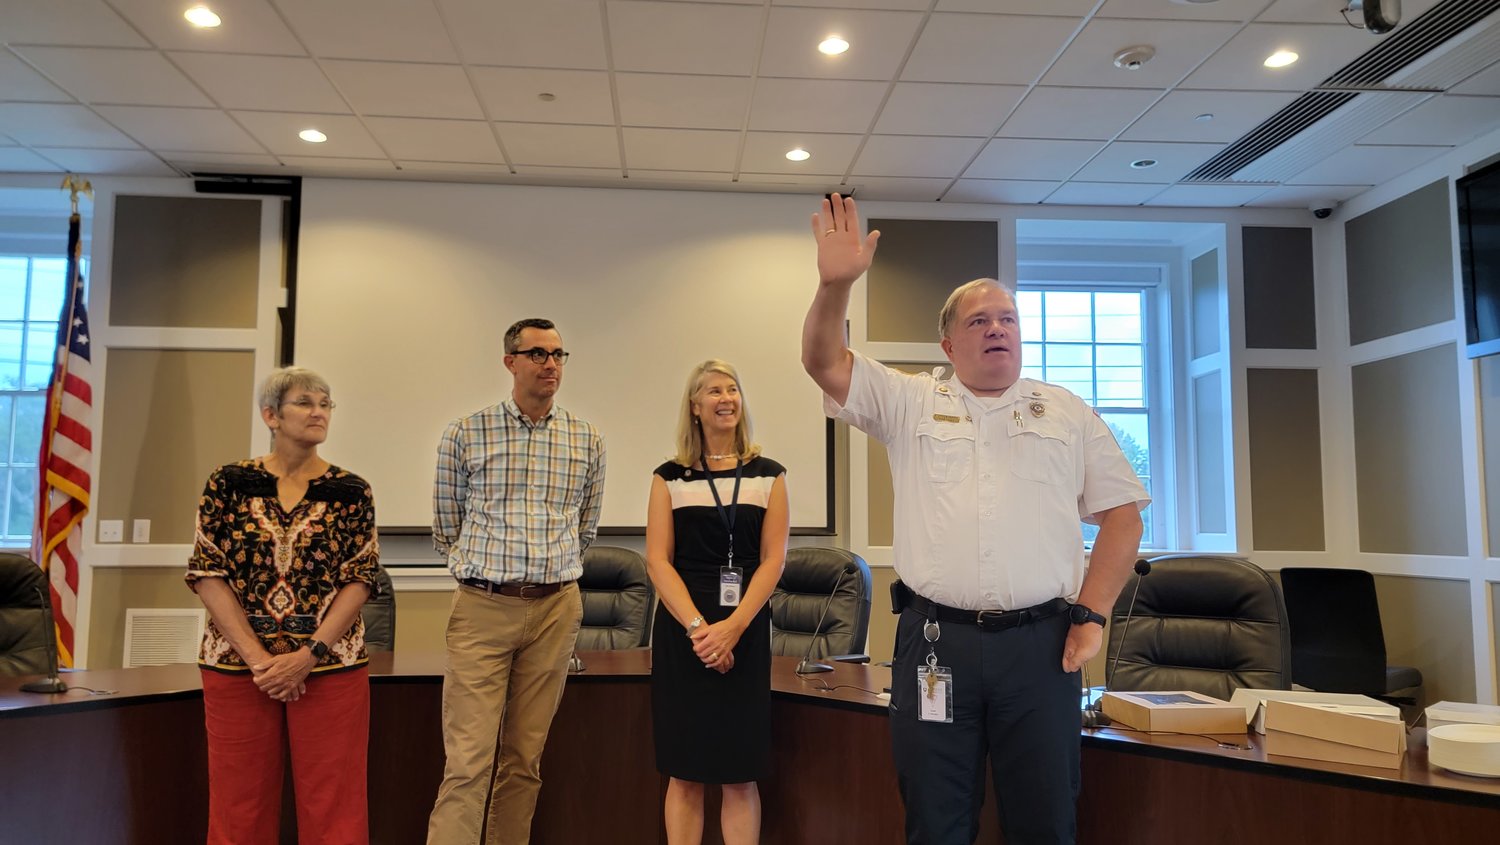 Fire chief Steve Murphy, right, thanks those in attendance at his retirement celebration Tuesday at the Fairgrounds Road Public Safety Facility. From left are Select Board members Brooke Mohr and Jason Bridges, and town manager Libby Gibson.